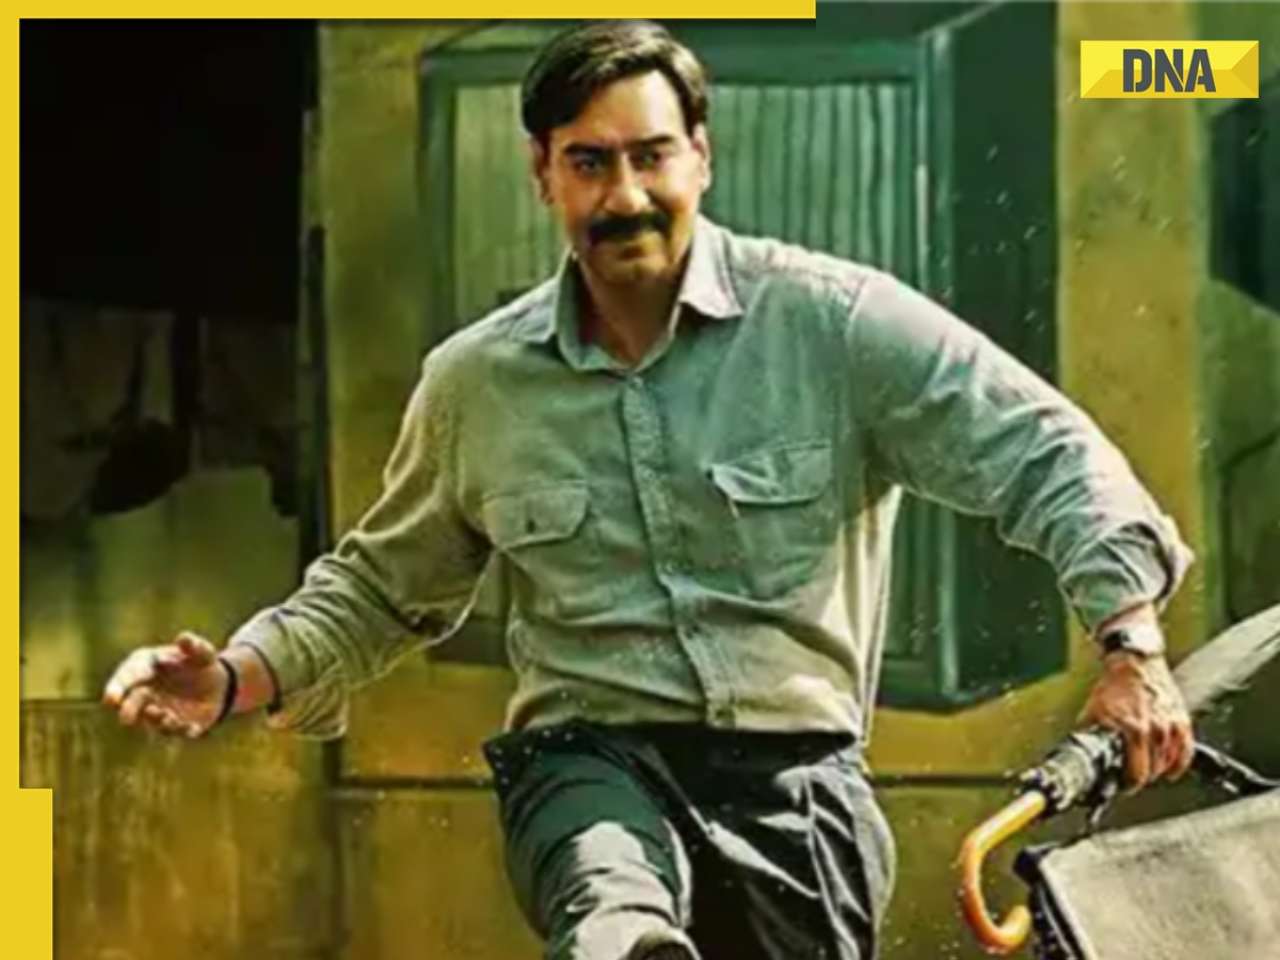 Maidaan box office collection day 4: Ajay Devgn-starrer continues to grow, crosses Rs 20 crore in opening weekend 